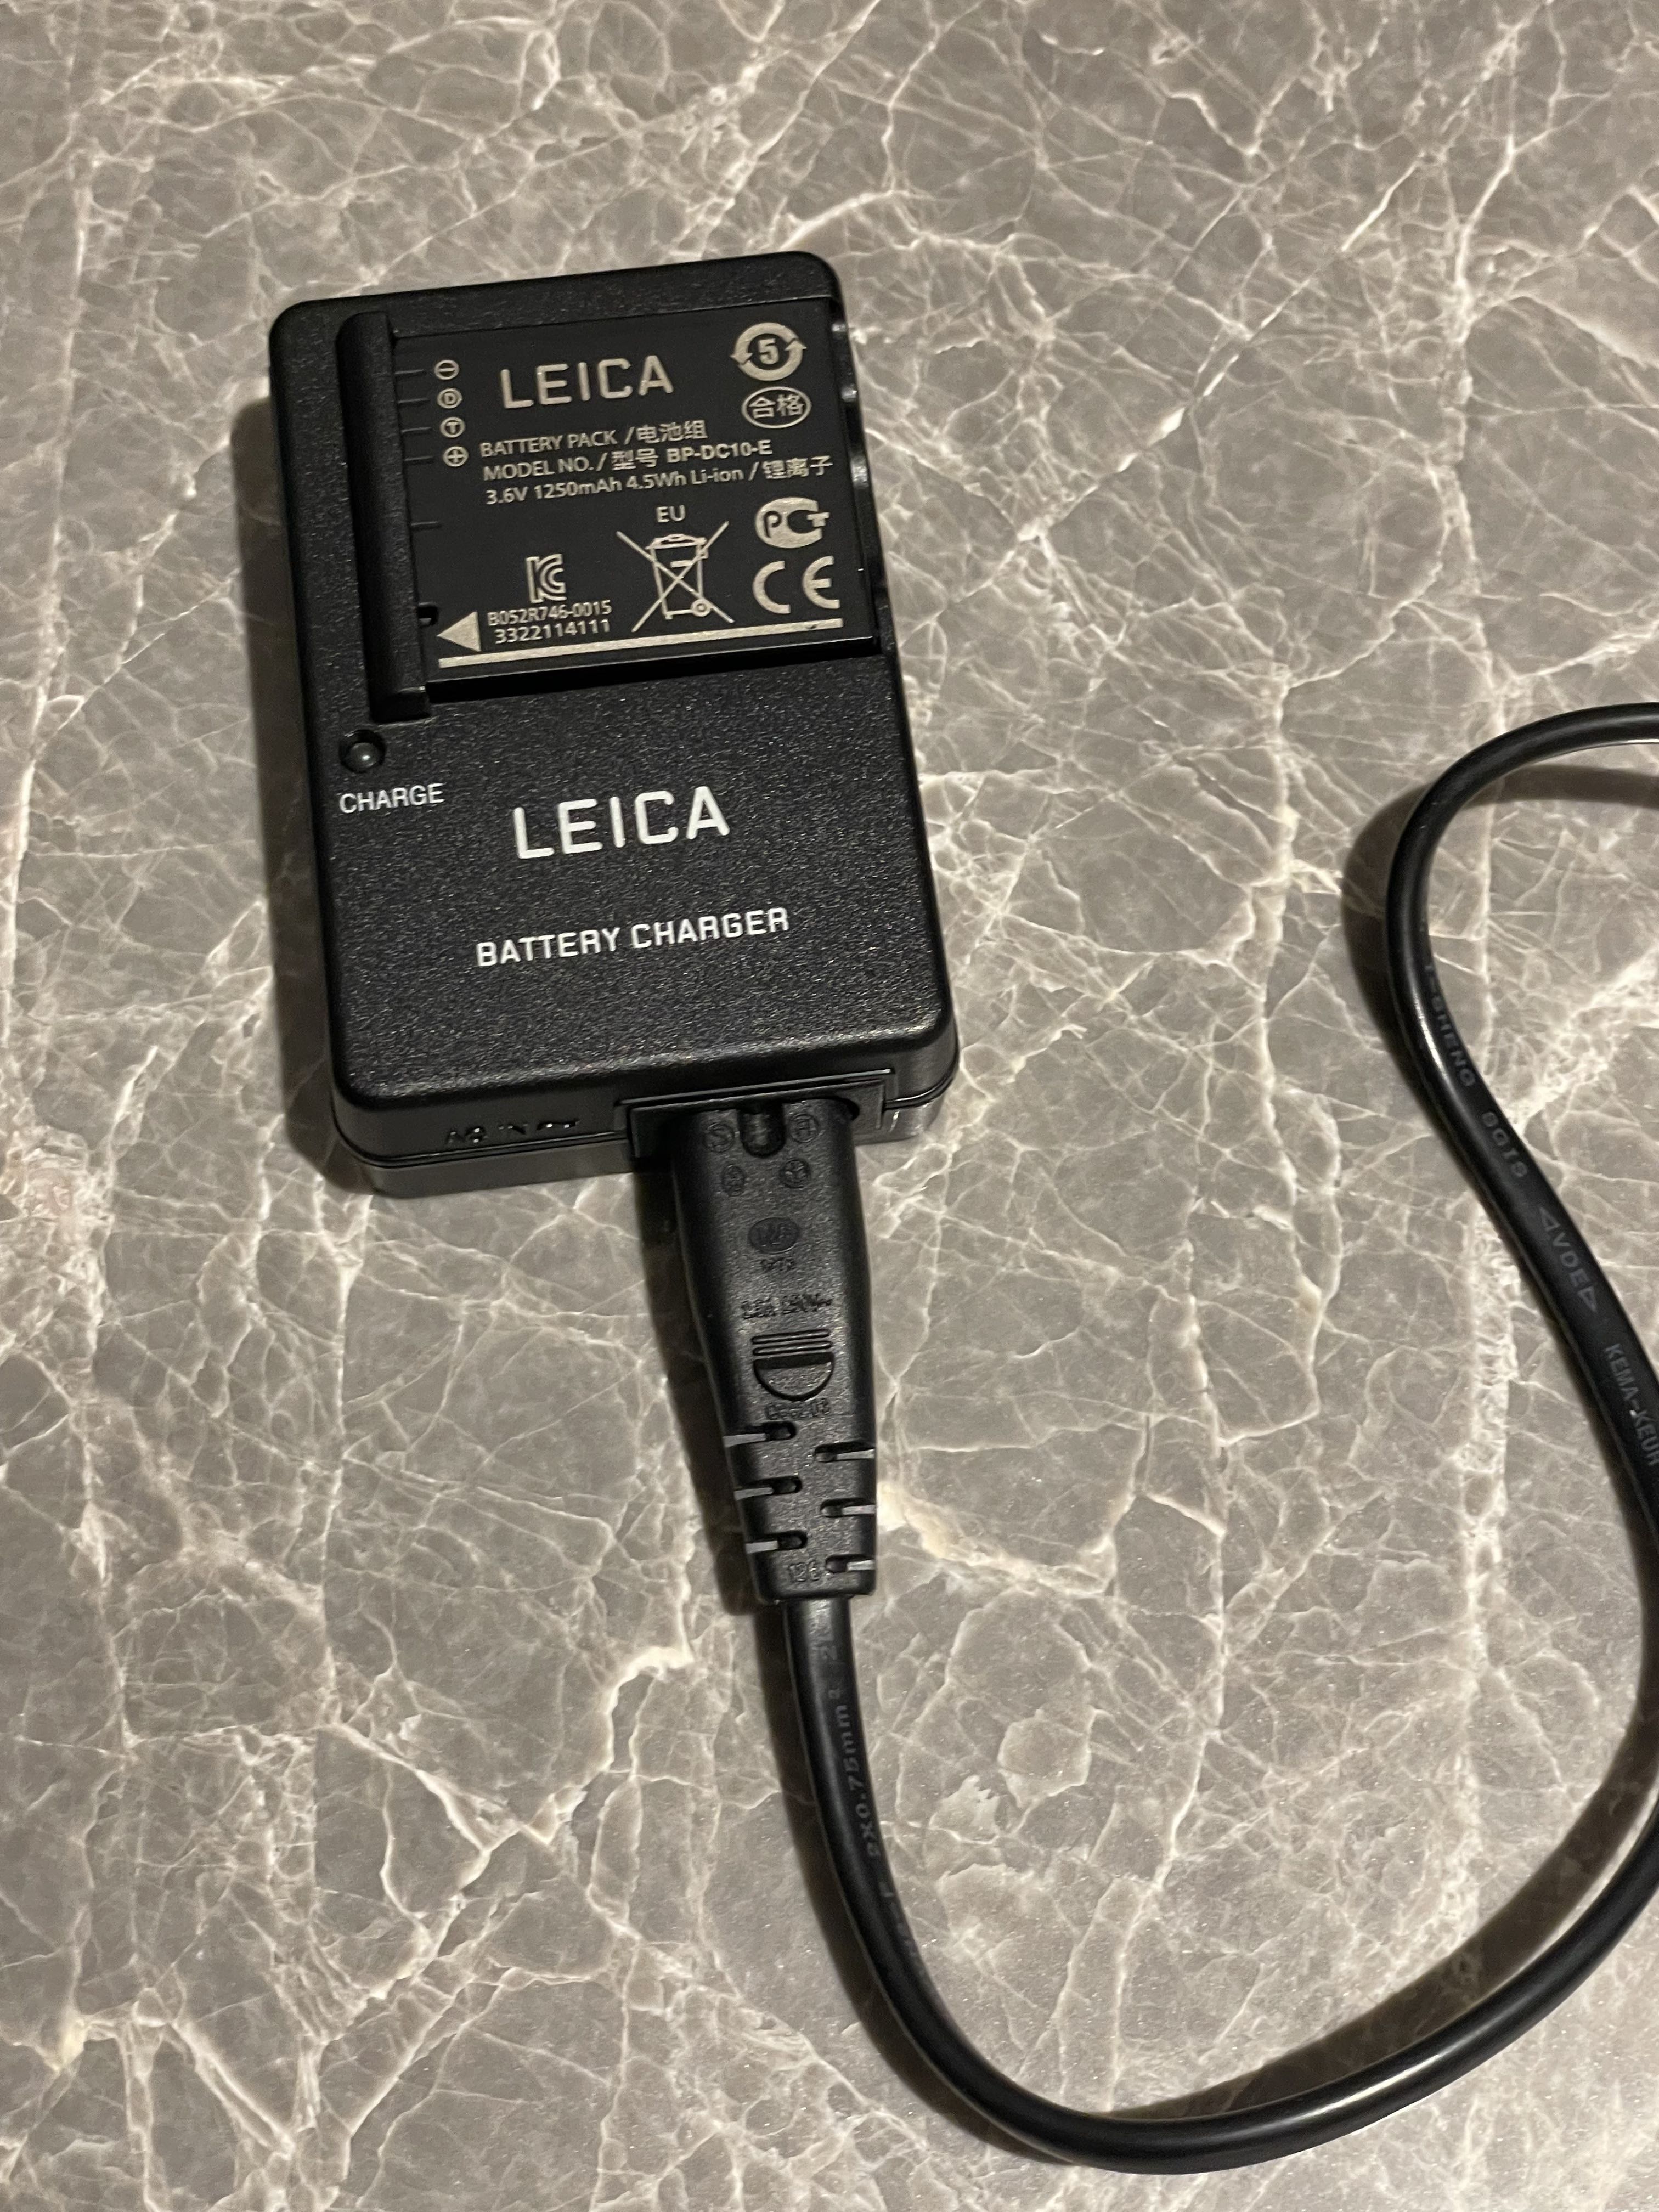 Leica BP-DC 10 Li-Ion Battery for the Leica D-Lux 5, D-Lux 6